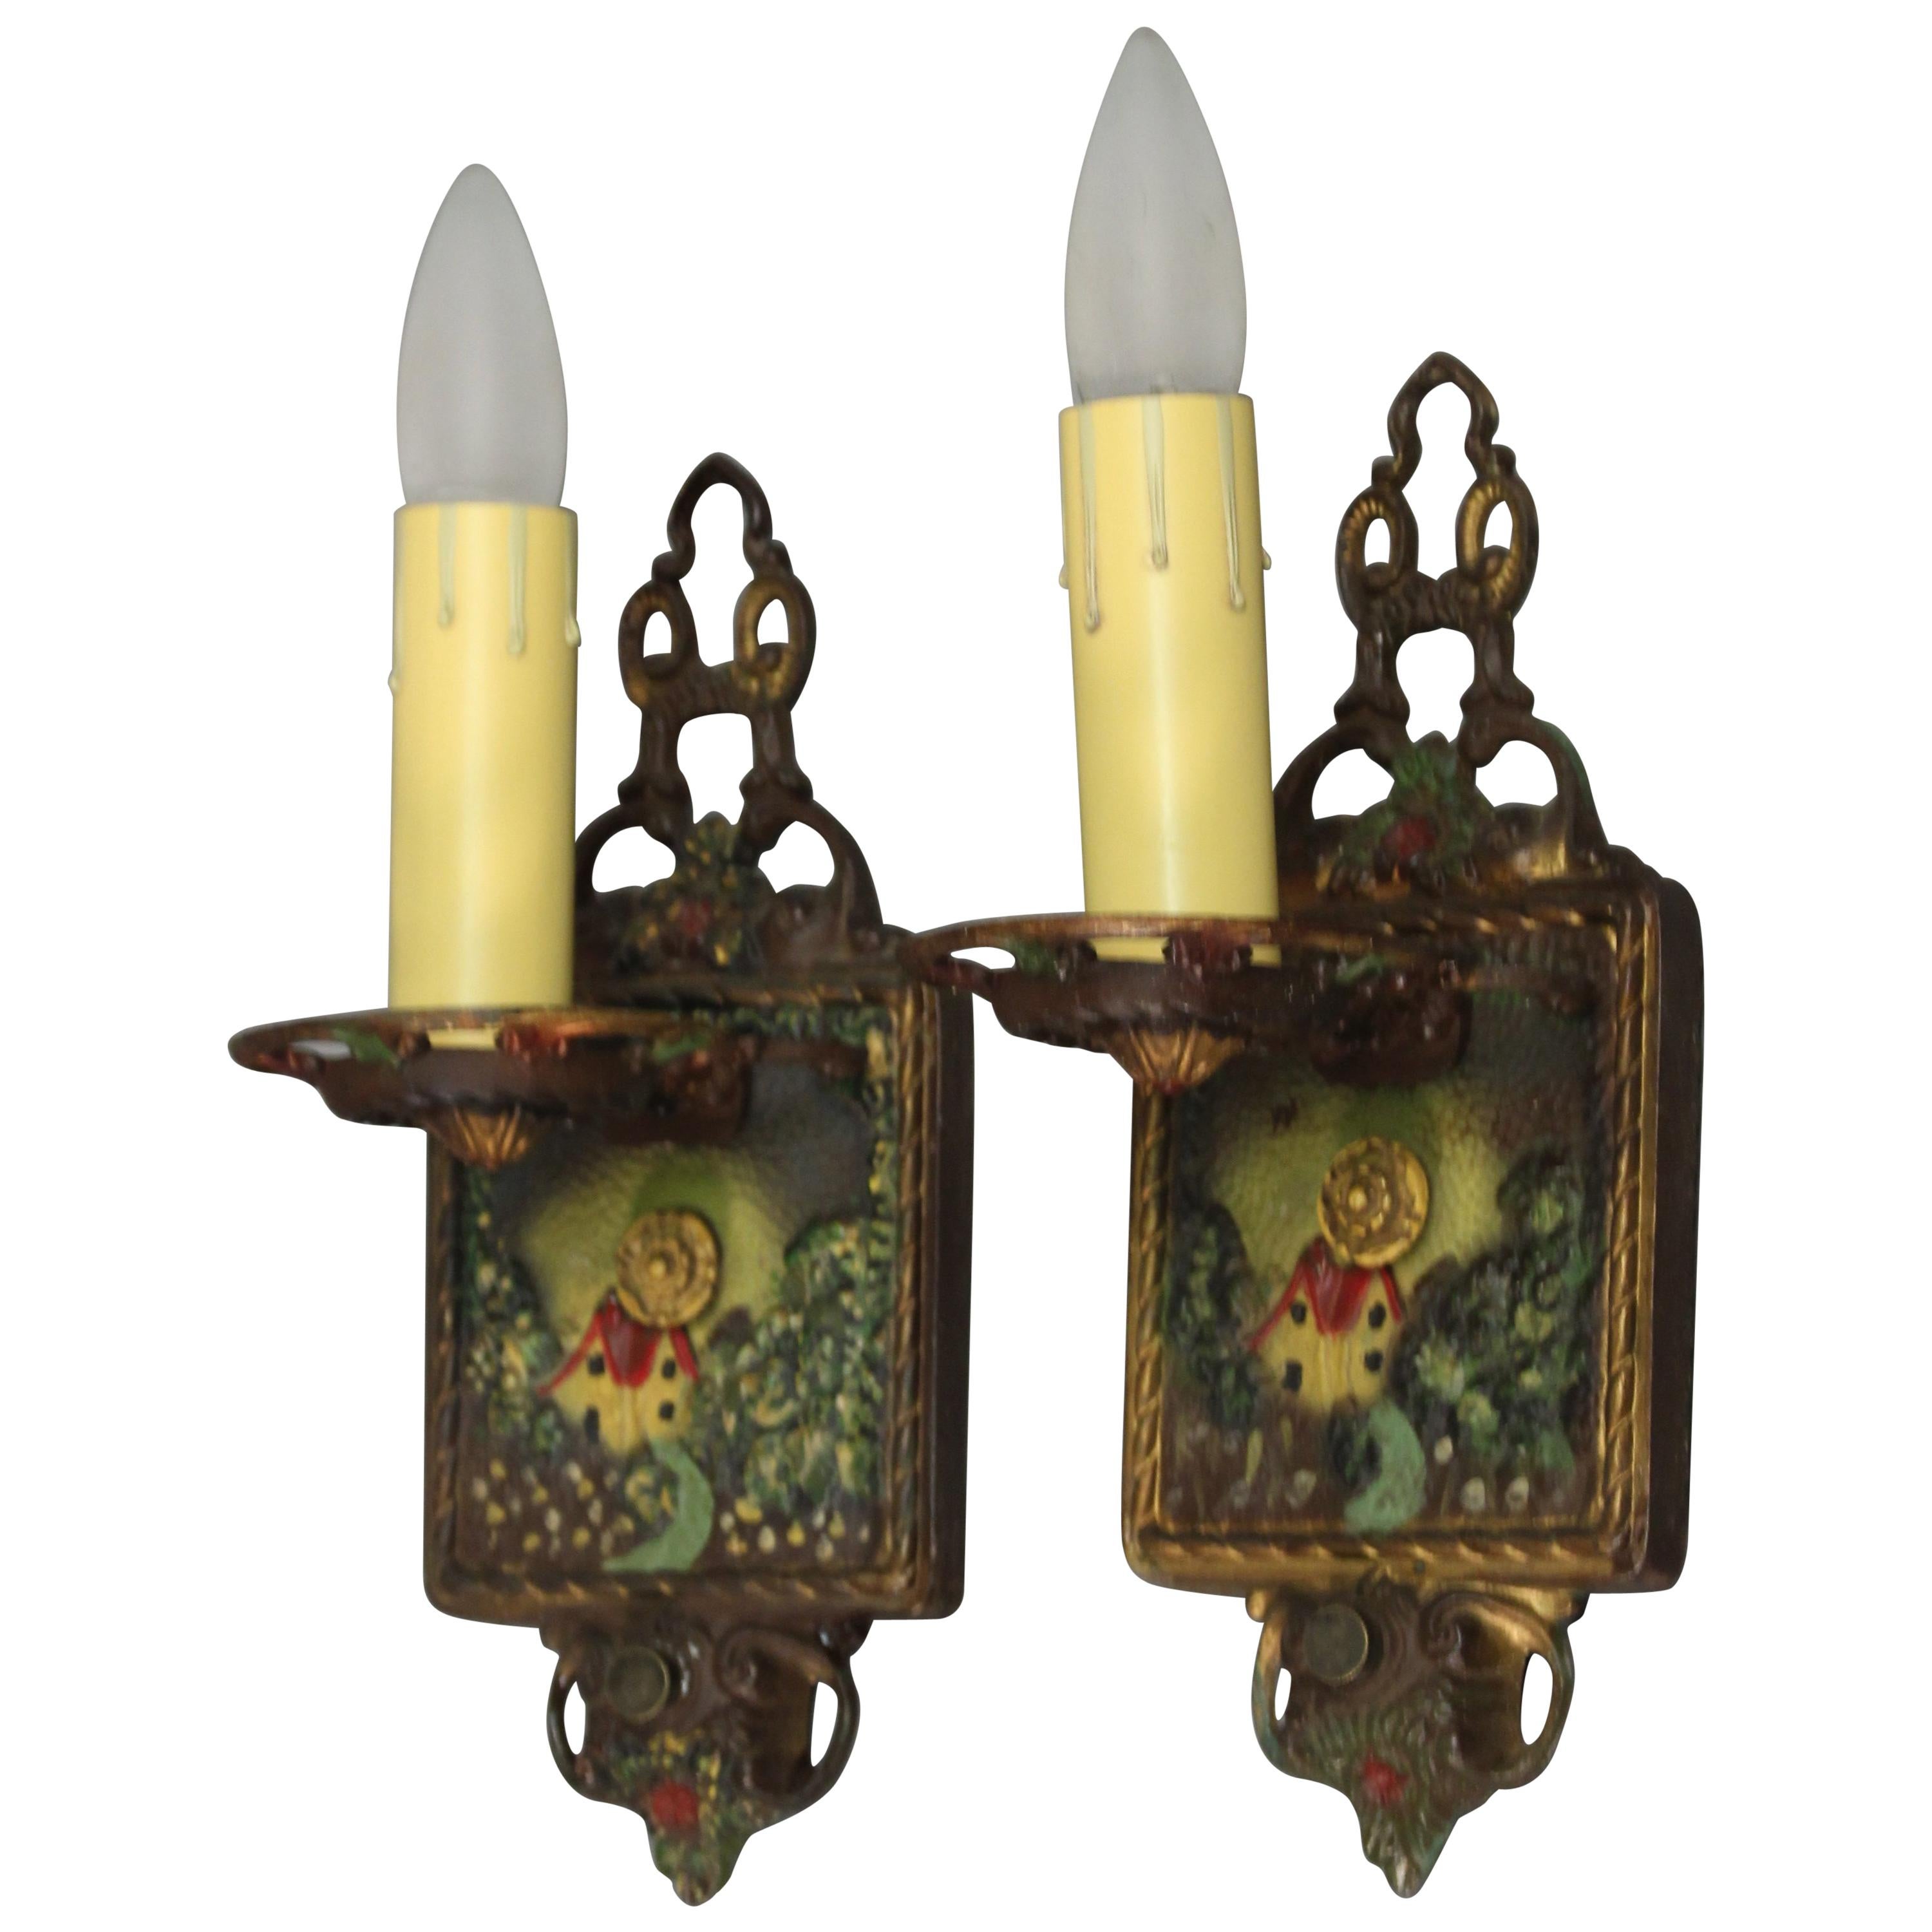 Spanish Revival Pair of 1920s Story Book Single Sconces